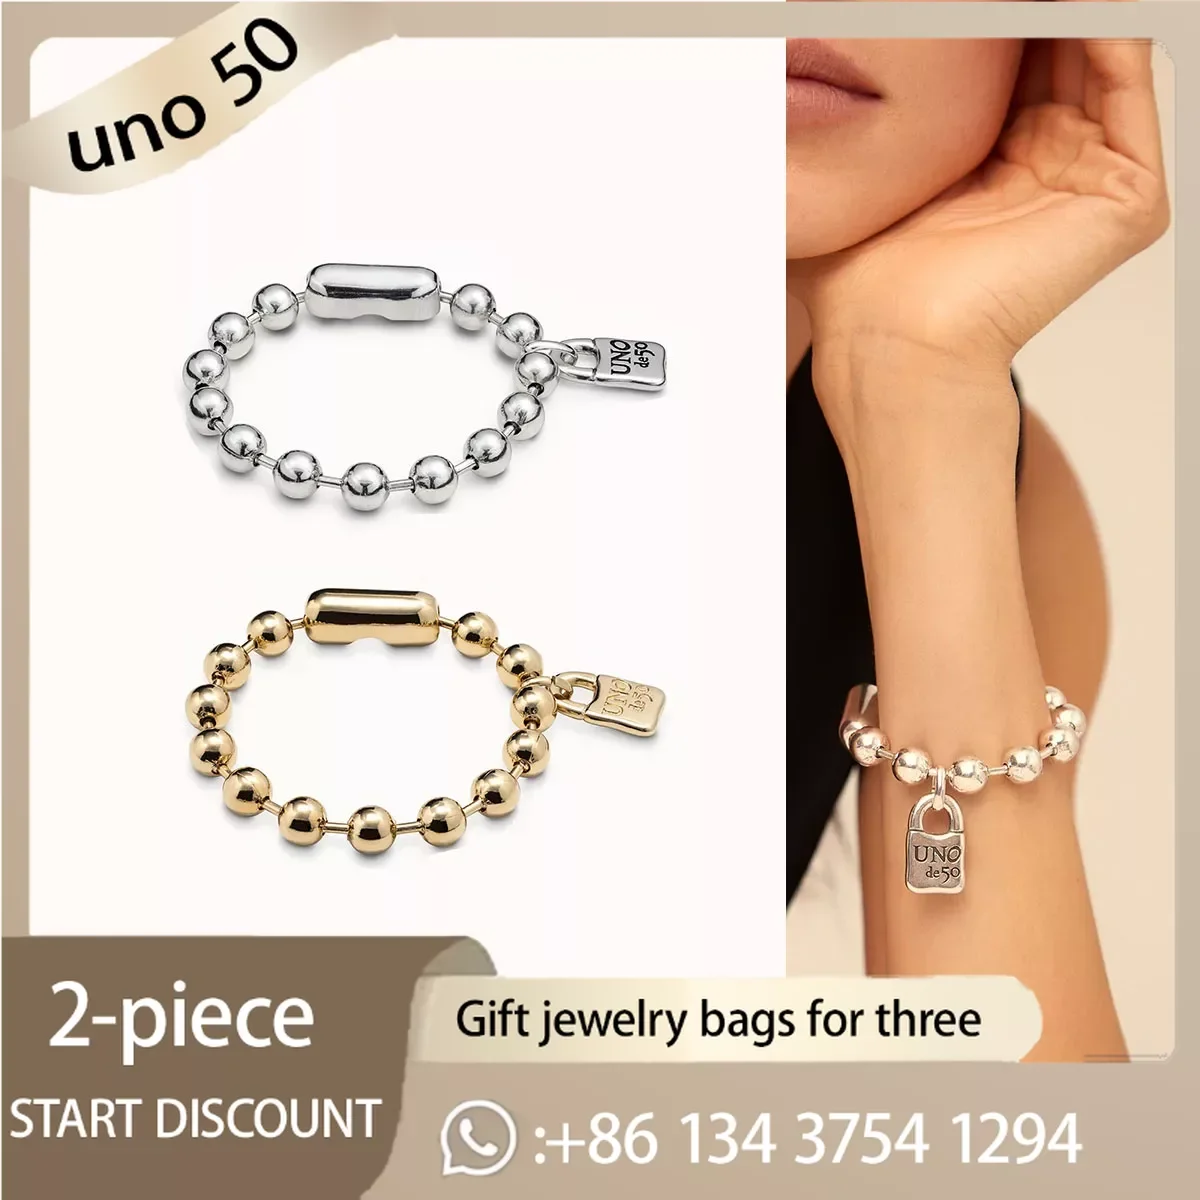 

2022 New Fit UNO DE 50 Fashion Plated 925 Silver 14k Gold Charm Silver BRACELET Niche Jewelry Gift